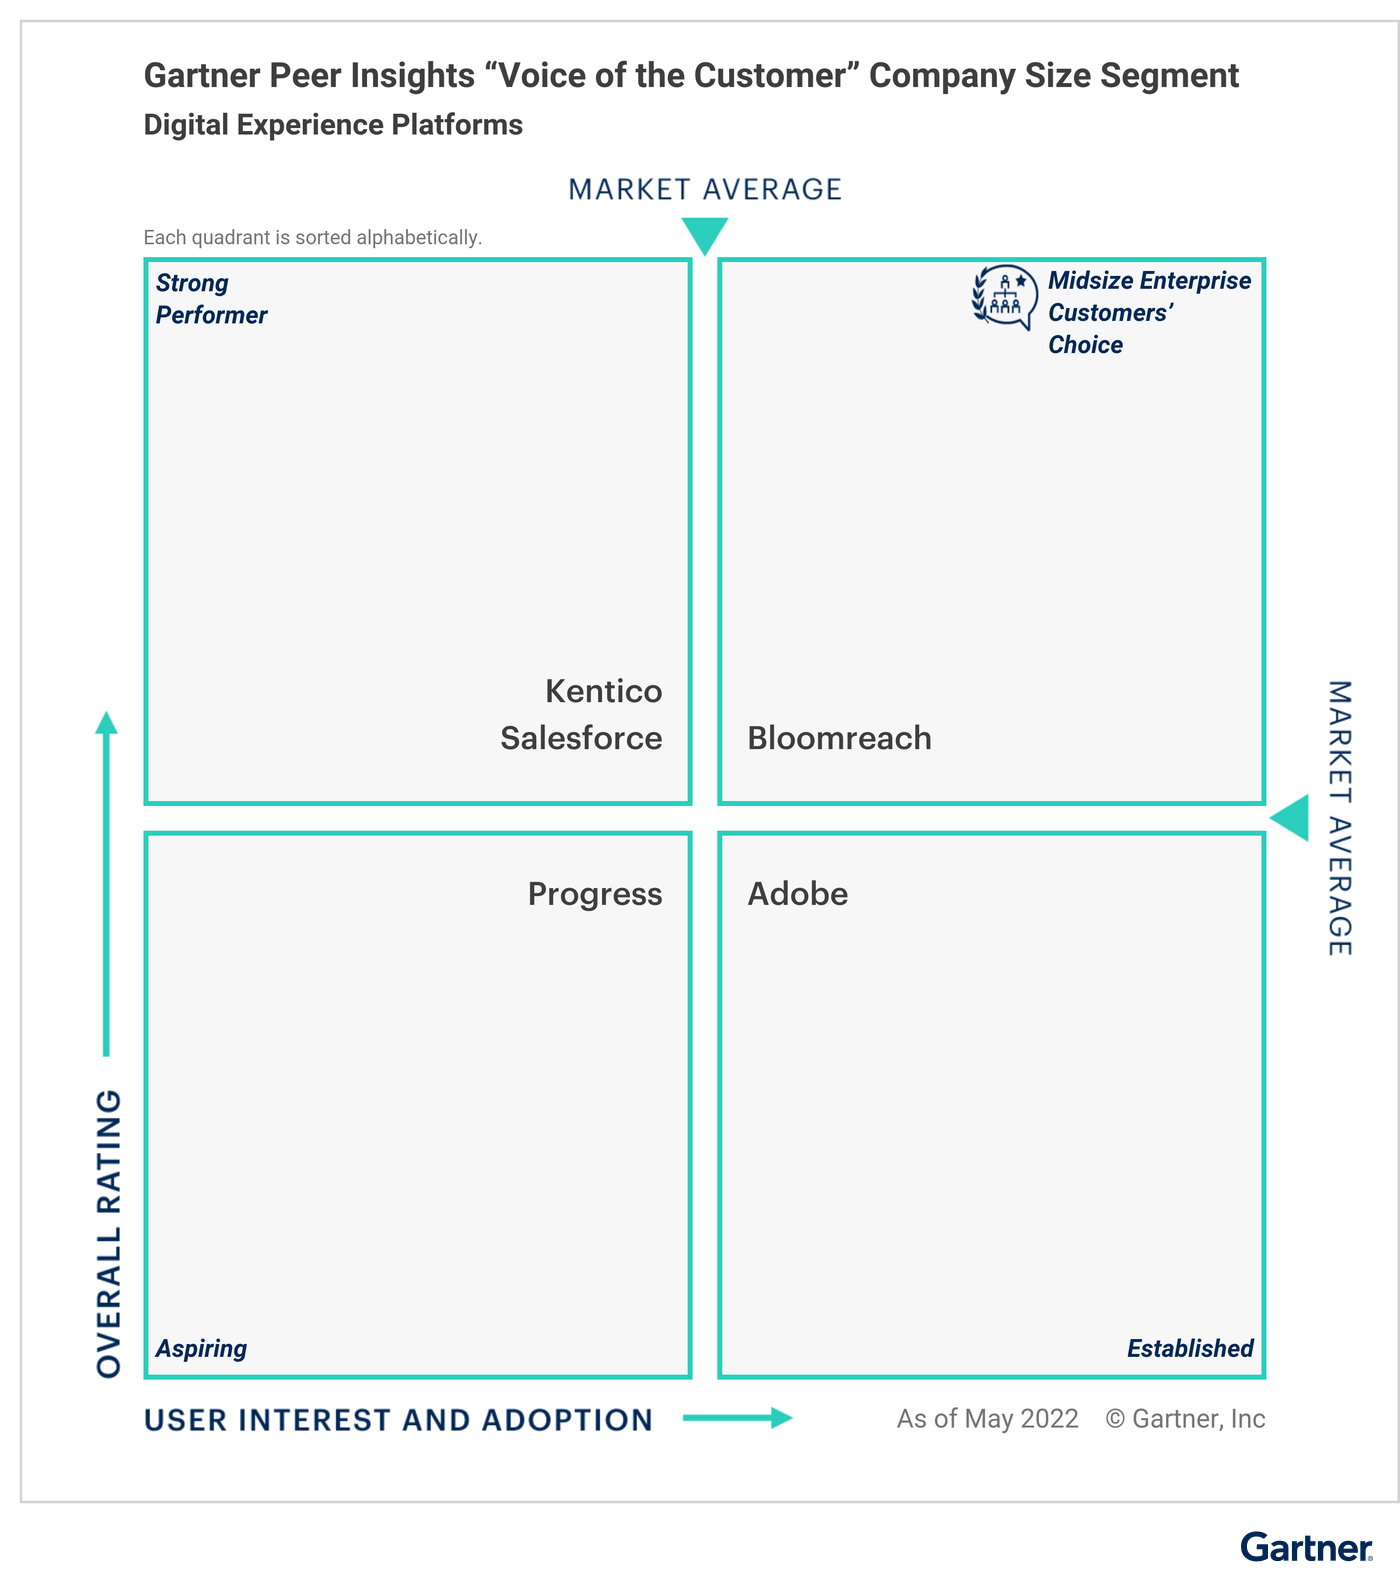 Bloomreach as Customers' Choice in the Gartner Peer Insights "Voice of the Customer" Quadrant for Mid-size Enterprise under the Digital Experience Platforms category.